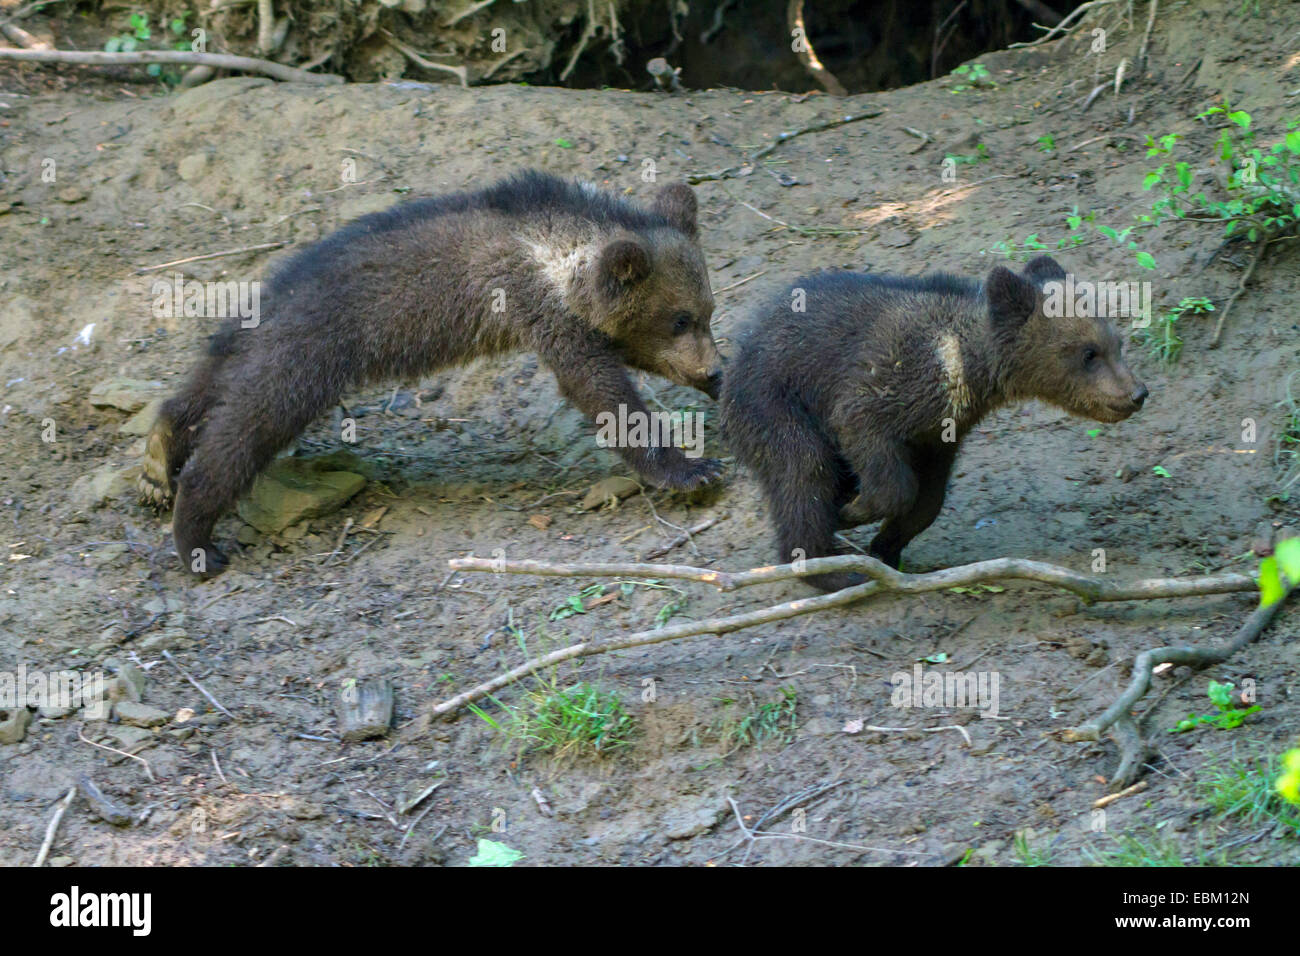 brown bear (Ursus arctos), two playing young brown bears Stock Photo